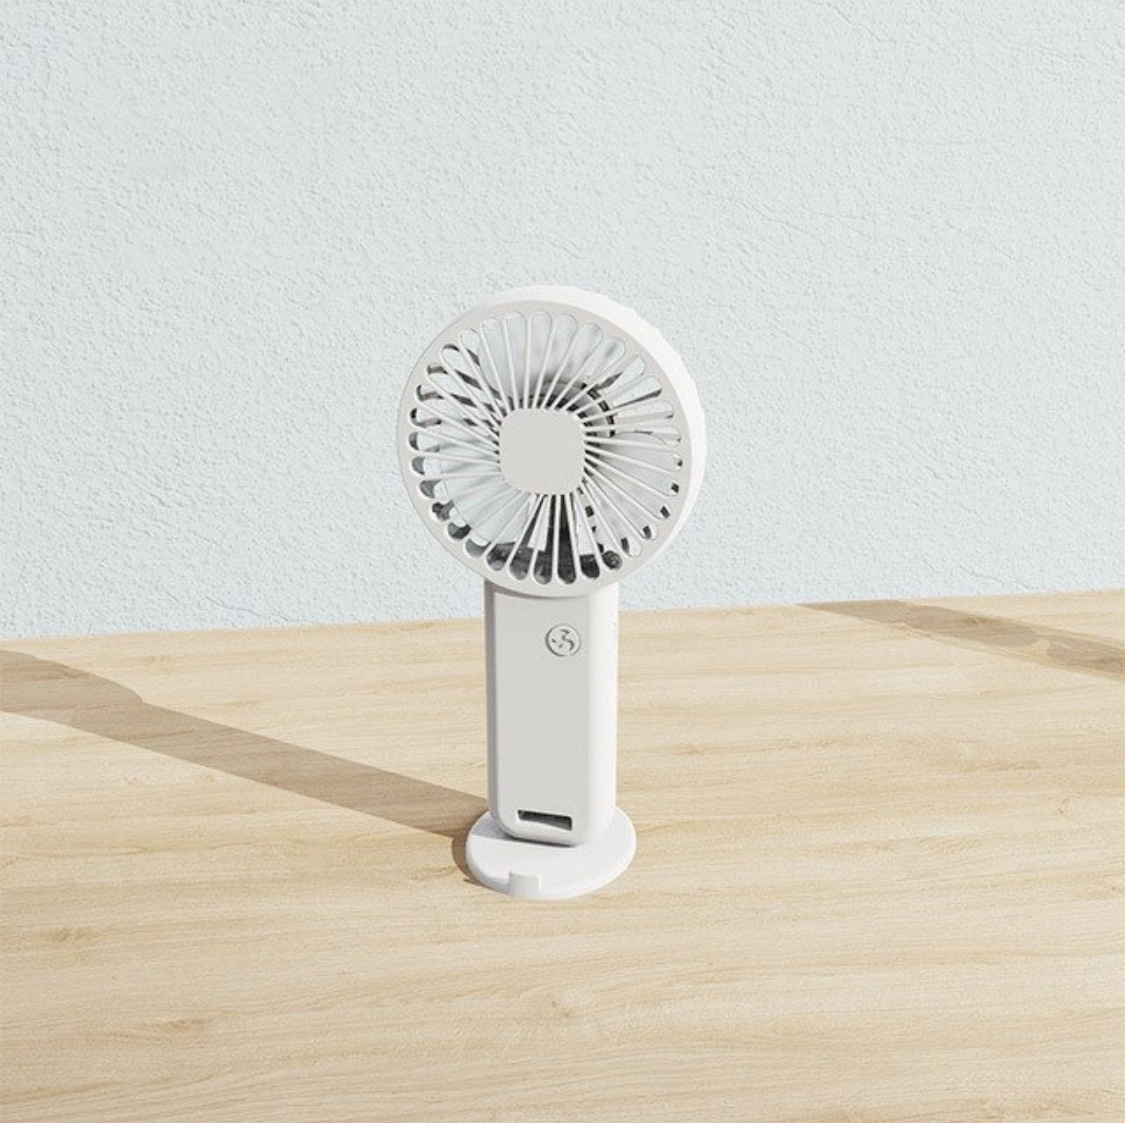 Rechargeable Portable Fan - Battery Handheld Fan with Phone Holder White